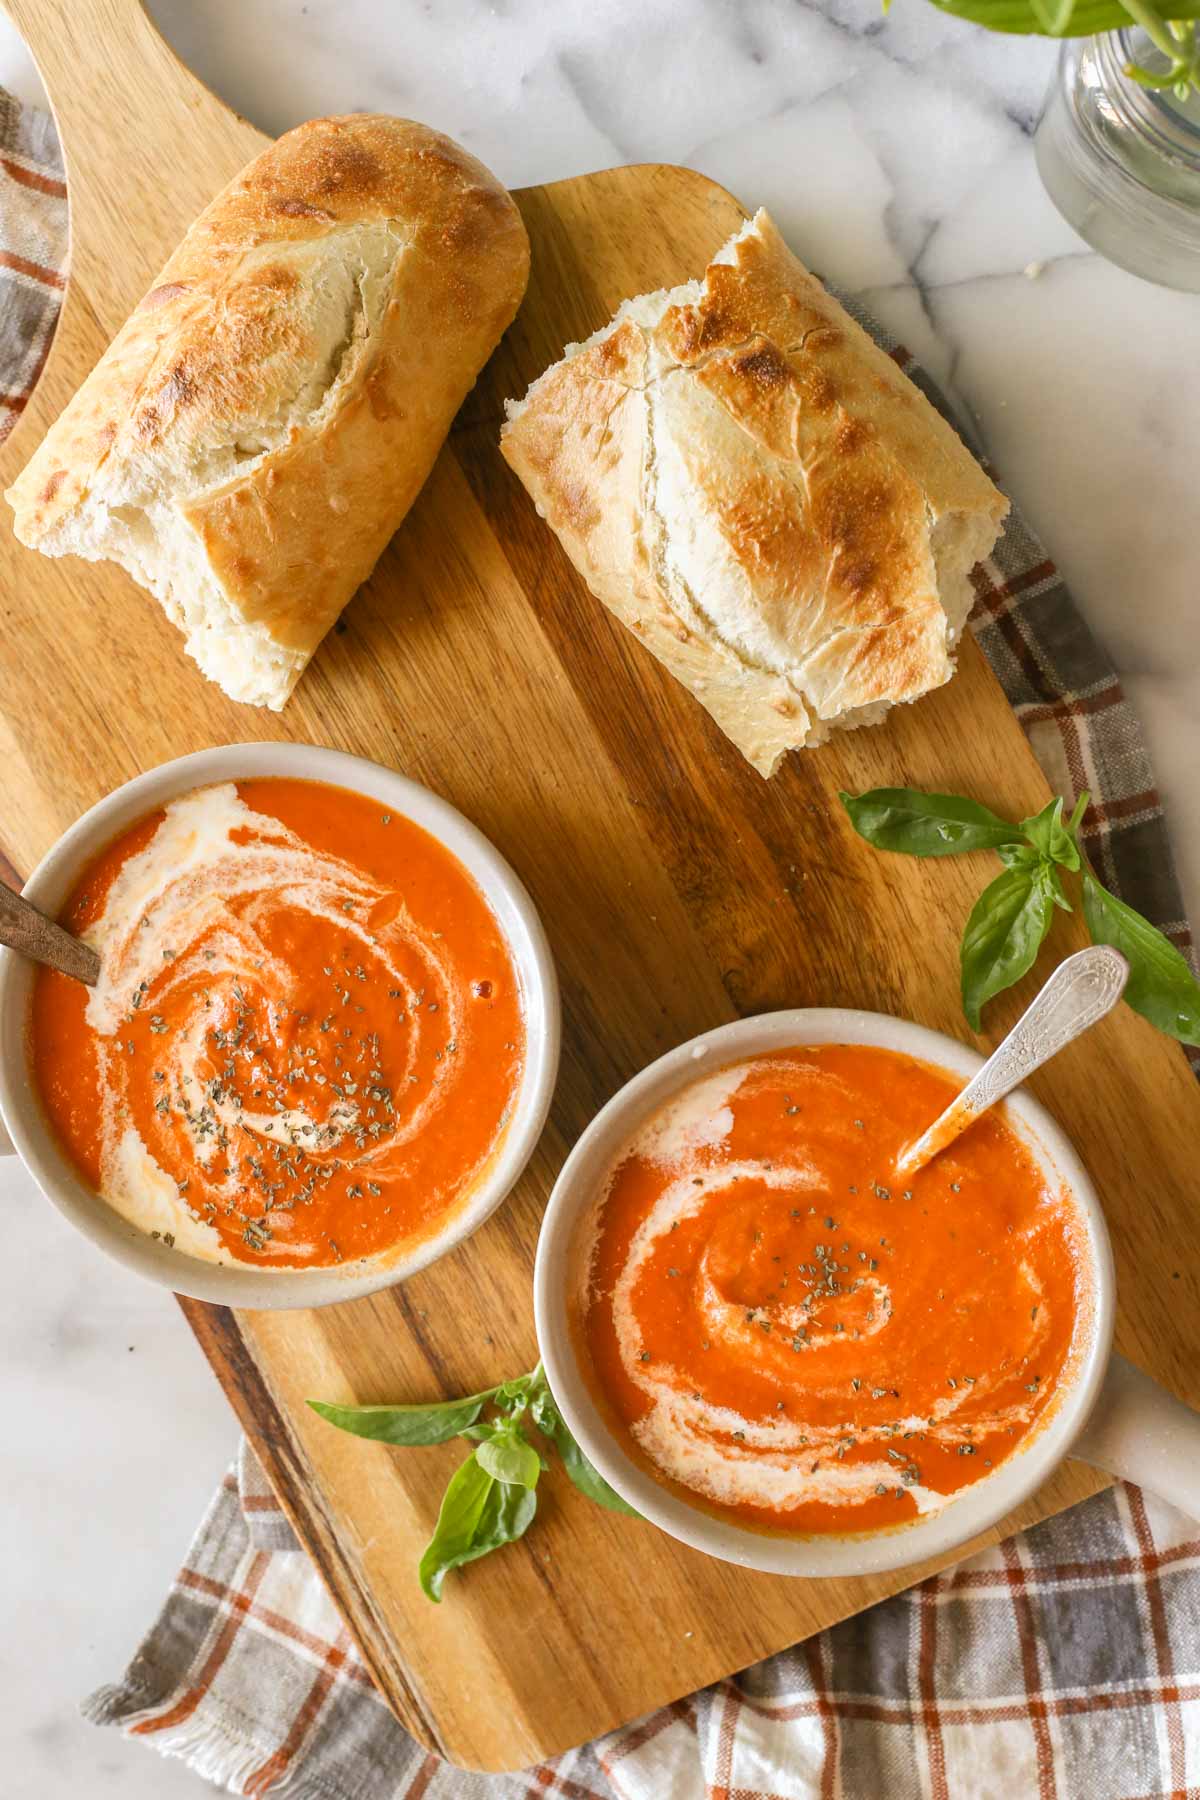 Overhead shot of two bowls of Creamy Balsamic Tomato Soup on a wood cutting board, along with two pieces of torn crusty bread.  